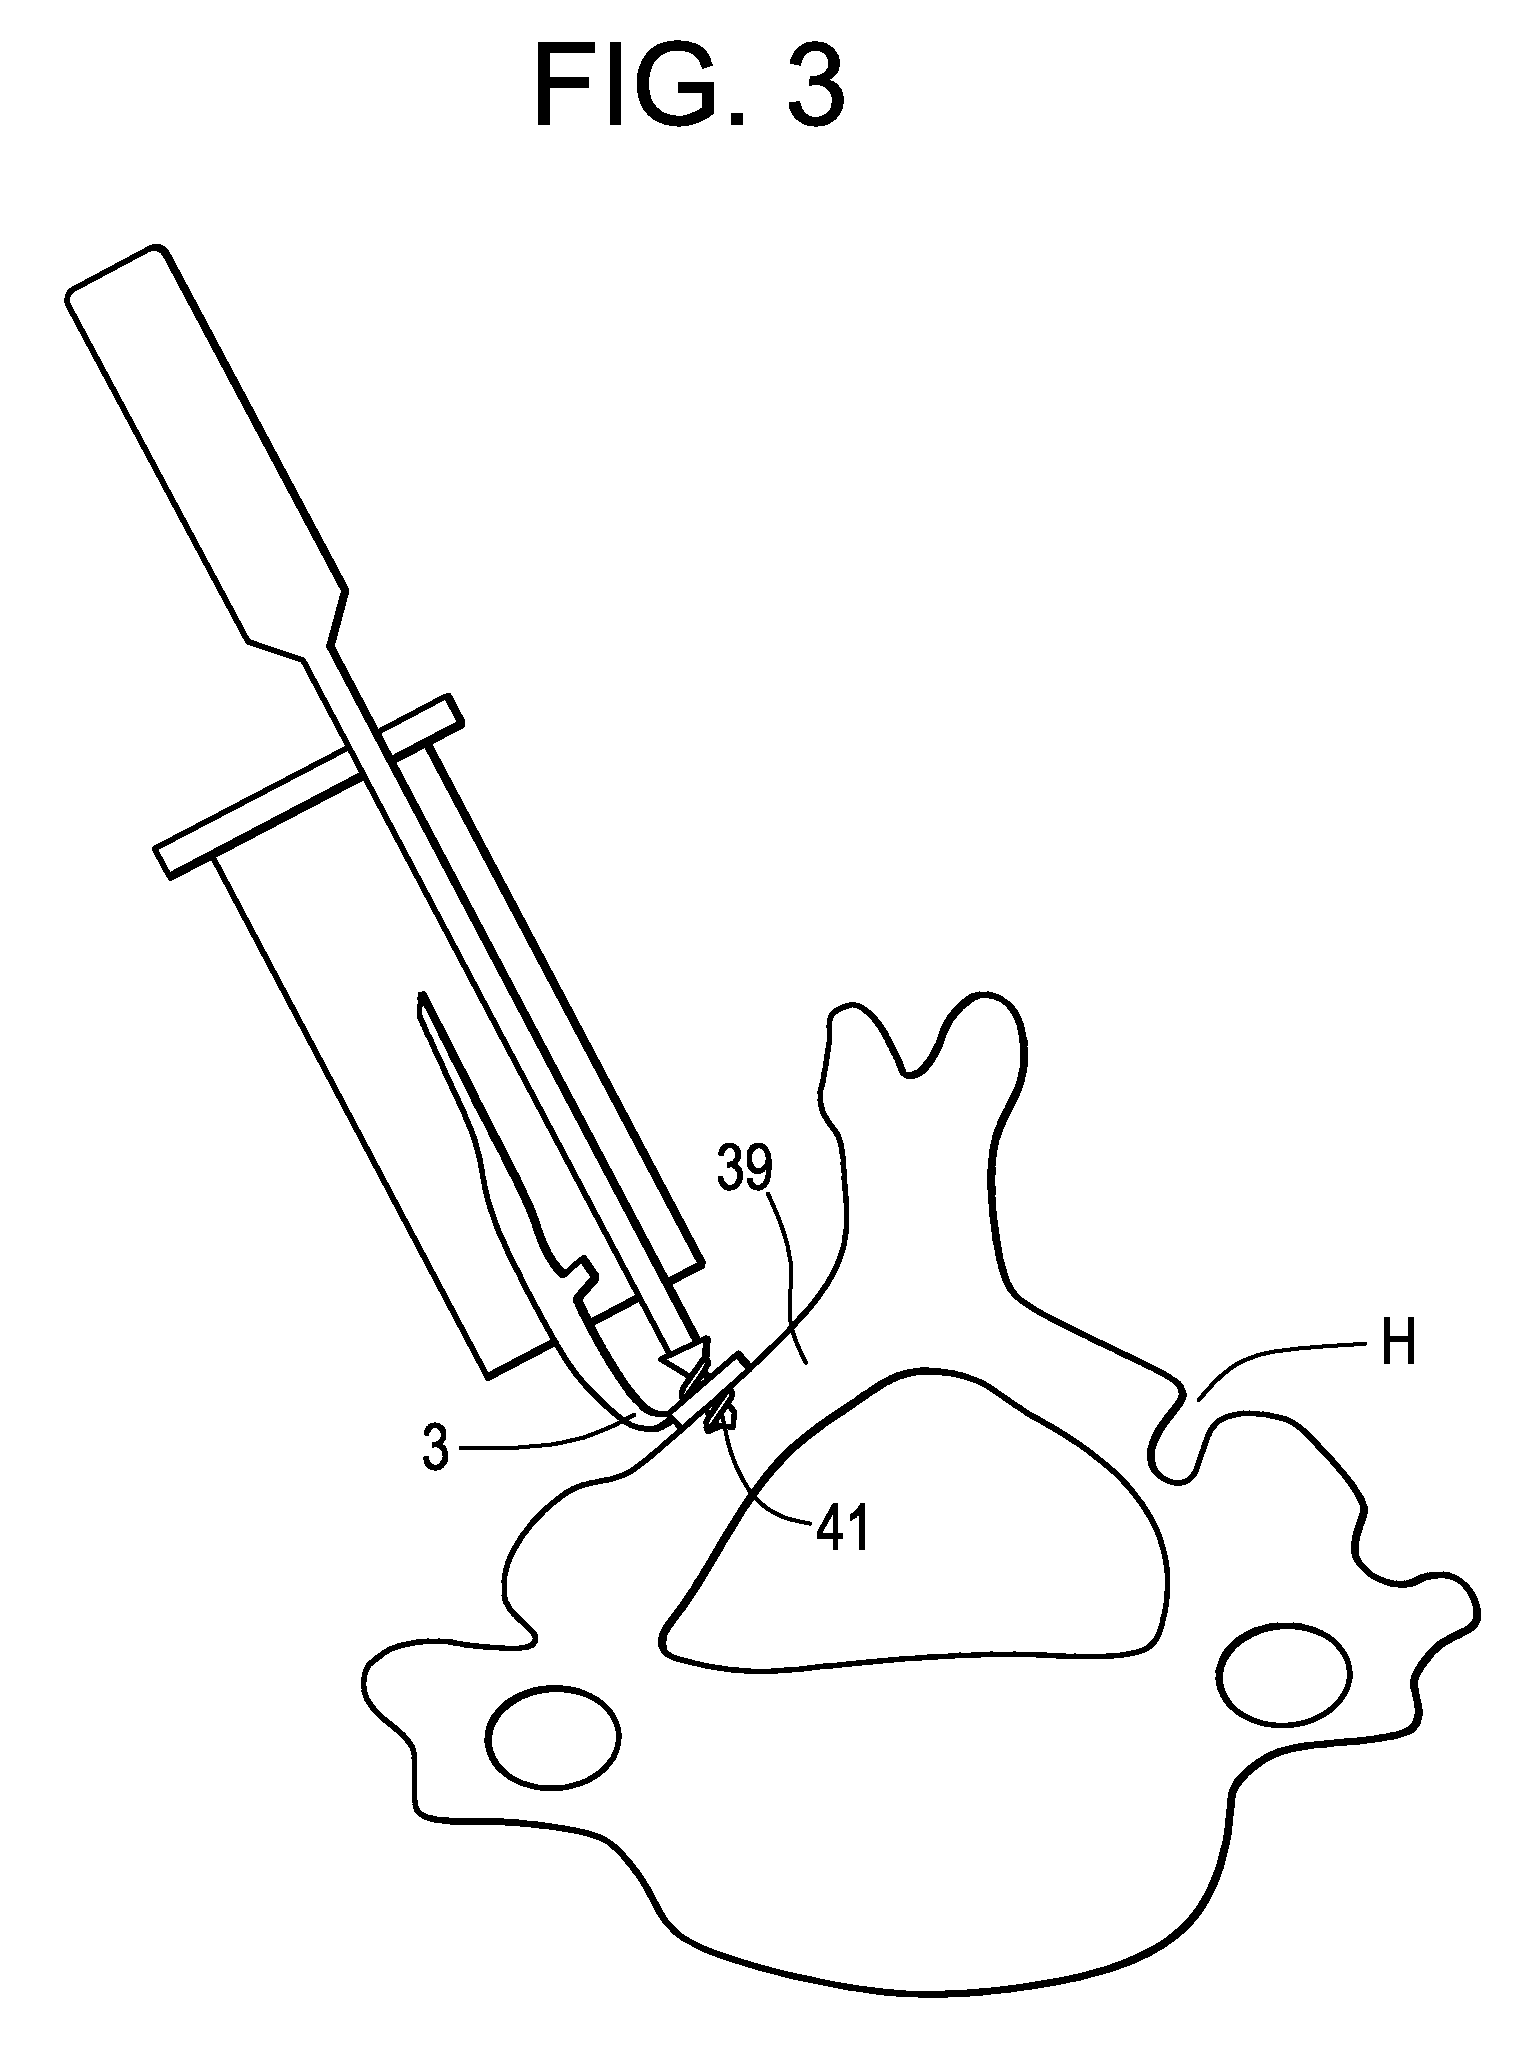 Methods and devices for expanding a spinal canal using balloons